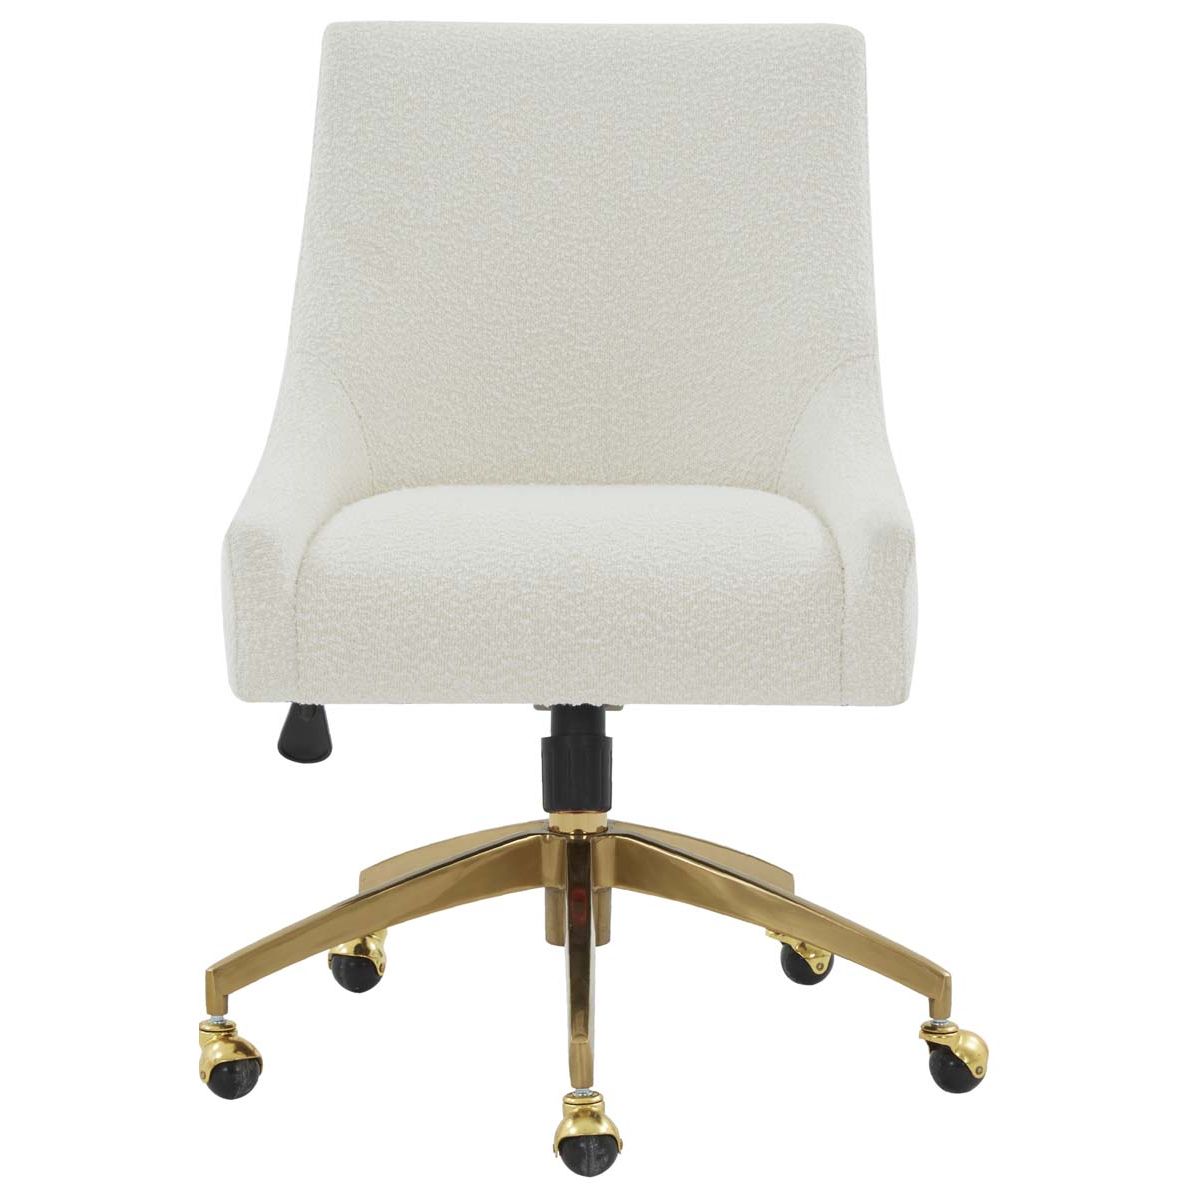 Safavieh Couture Jakob Adjustable Swivel Desk Chair - Ivory / Gold